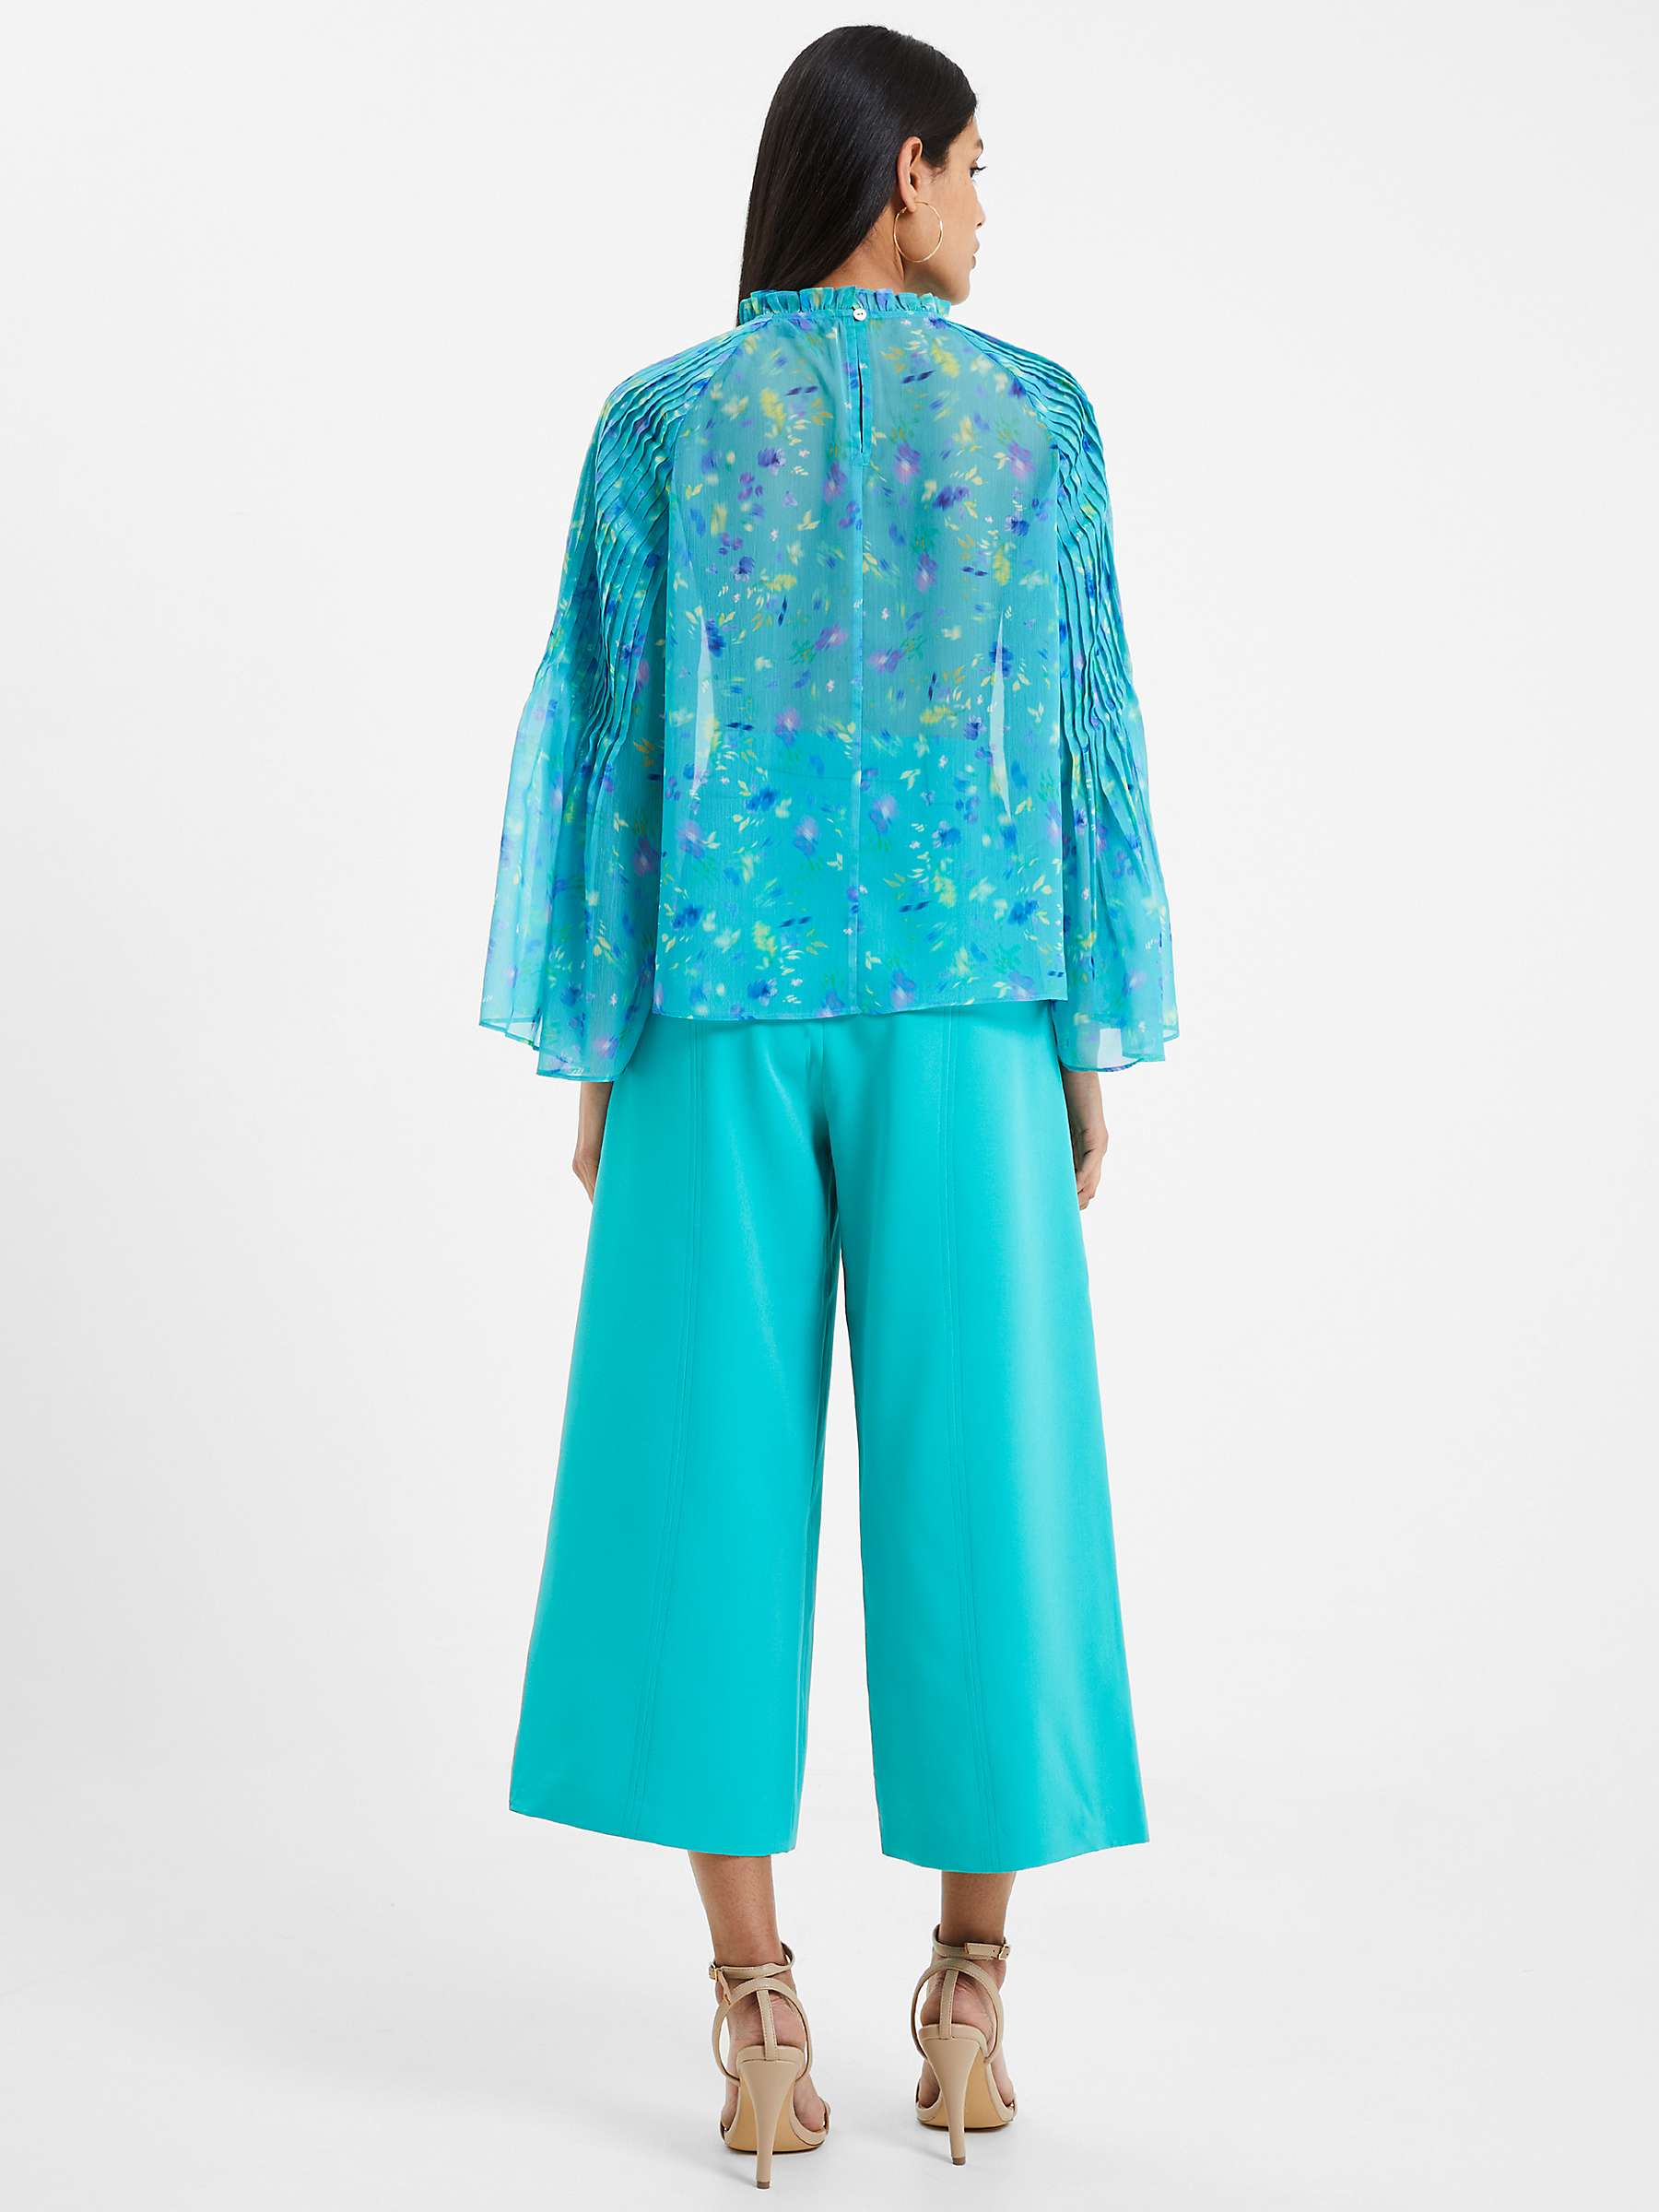 Buy French Connection Aden Hallie Pleat Crinkle Top, Jaded Teal/Multi Online at johnlewis.com